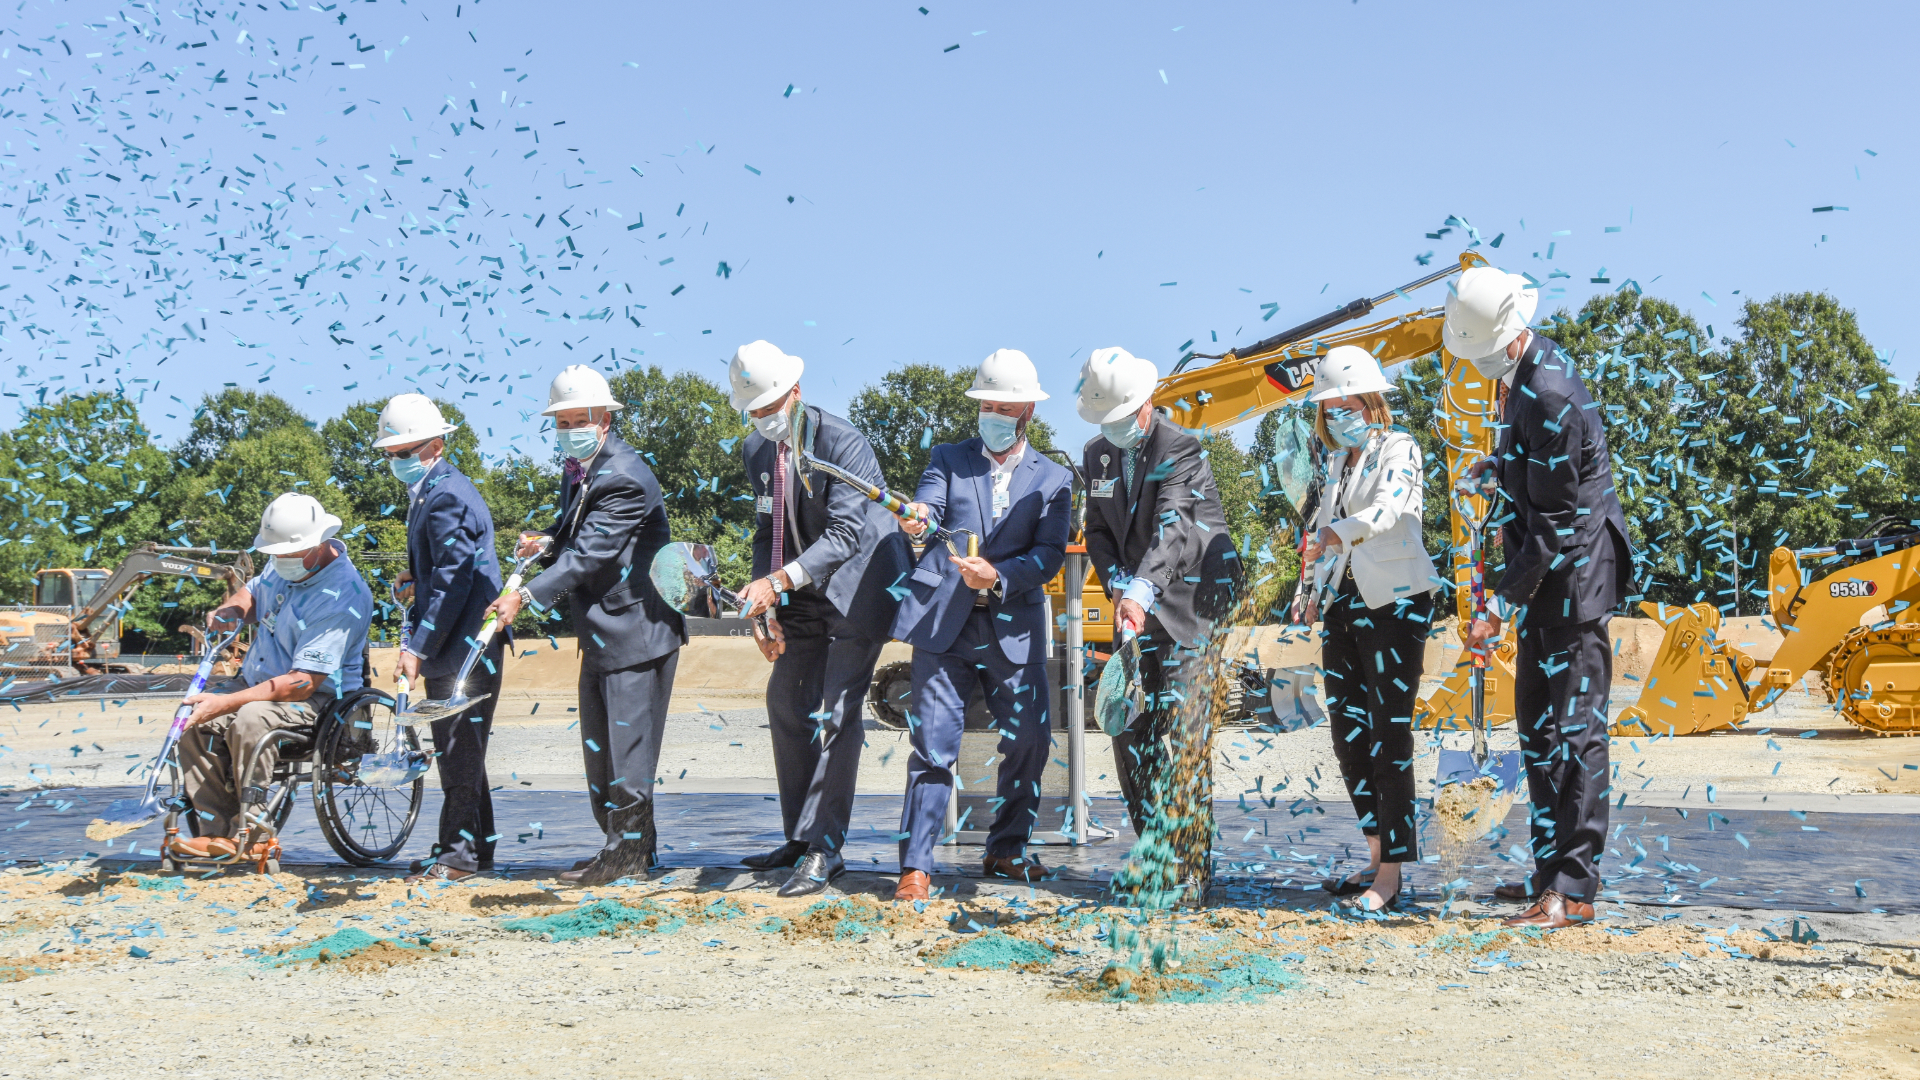 Atrium Health is celebrating a significant milestone in its rich history of caring for patients throughout the Carolinas and Southeast region. Today marked the official groundbreaking of the new Atrium Health Carolinas Rehabilitation hospital, in Charlotte. 